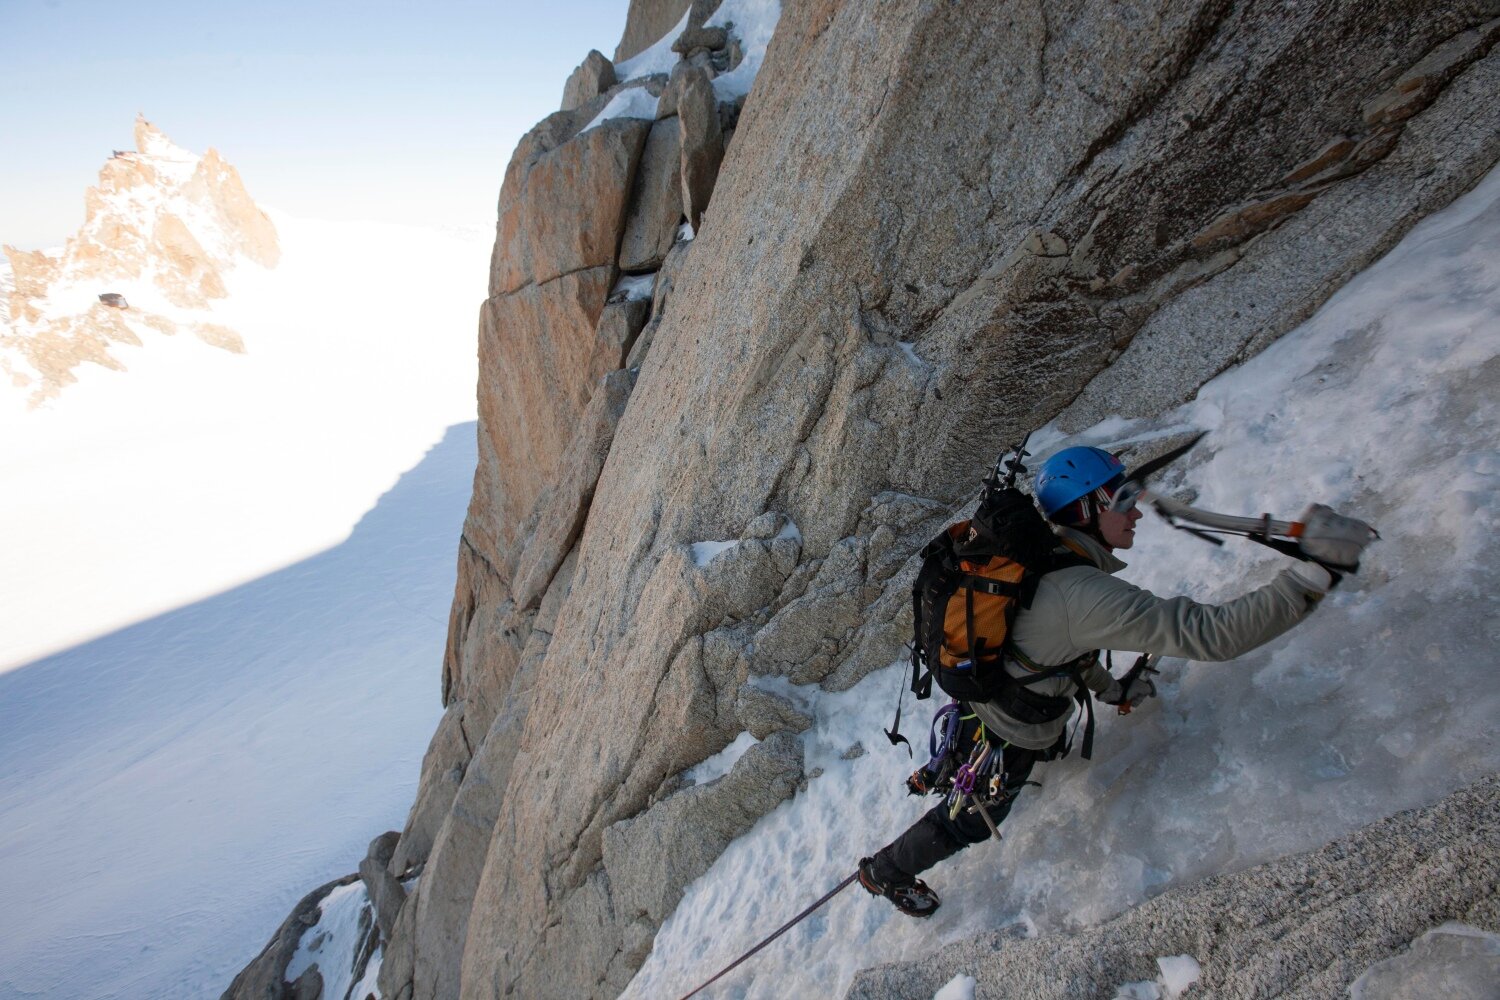 Excellent late season conditions on the crux 4th pitch of the Chèré Couloir (D4, 350m), one of a number of classic alpine ice routes on Mont Blanc du Tacul, high above Chamonix. The route commands an awesome position above the glacier, looking across to Cosmiques and L’Aiguille du Midi; it is a popular introduction to the more technical mountain ice routes in the Western Alps.